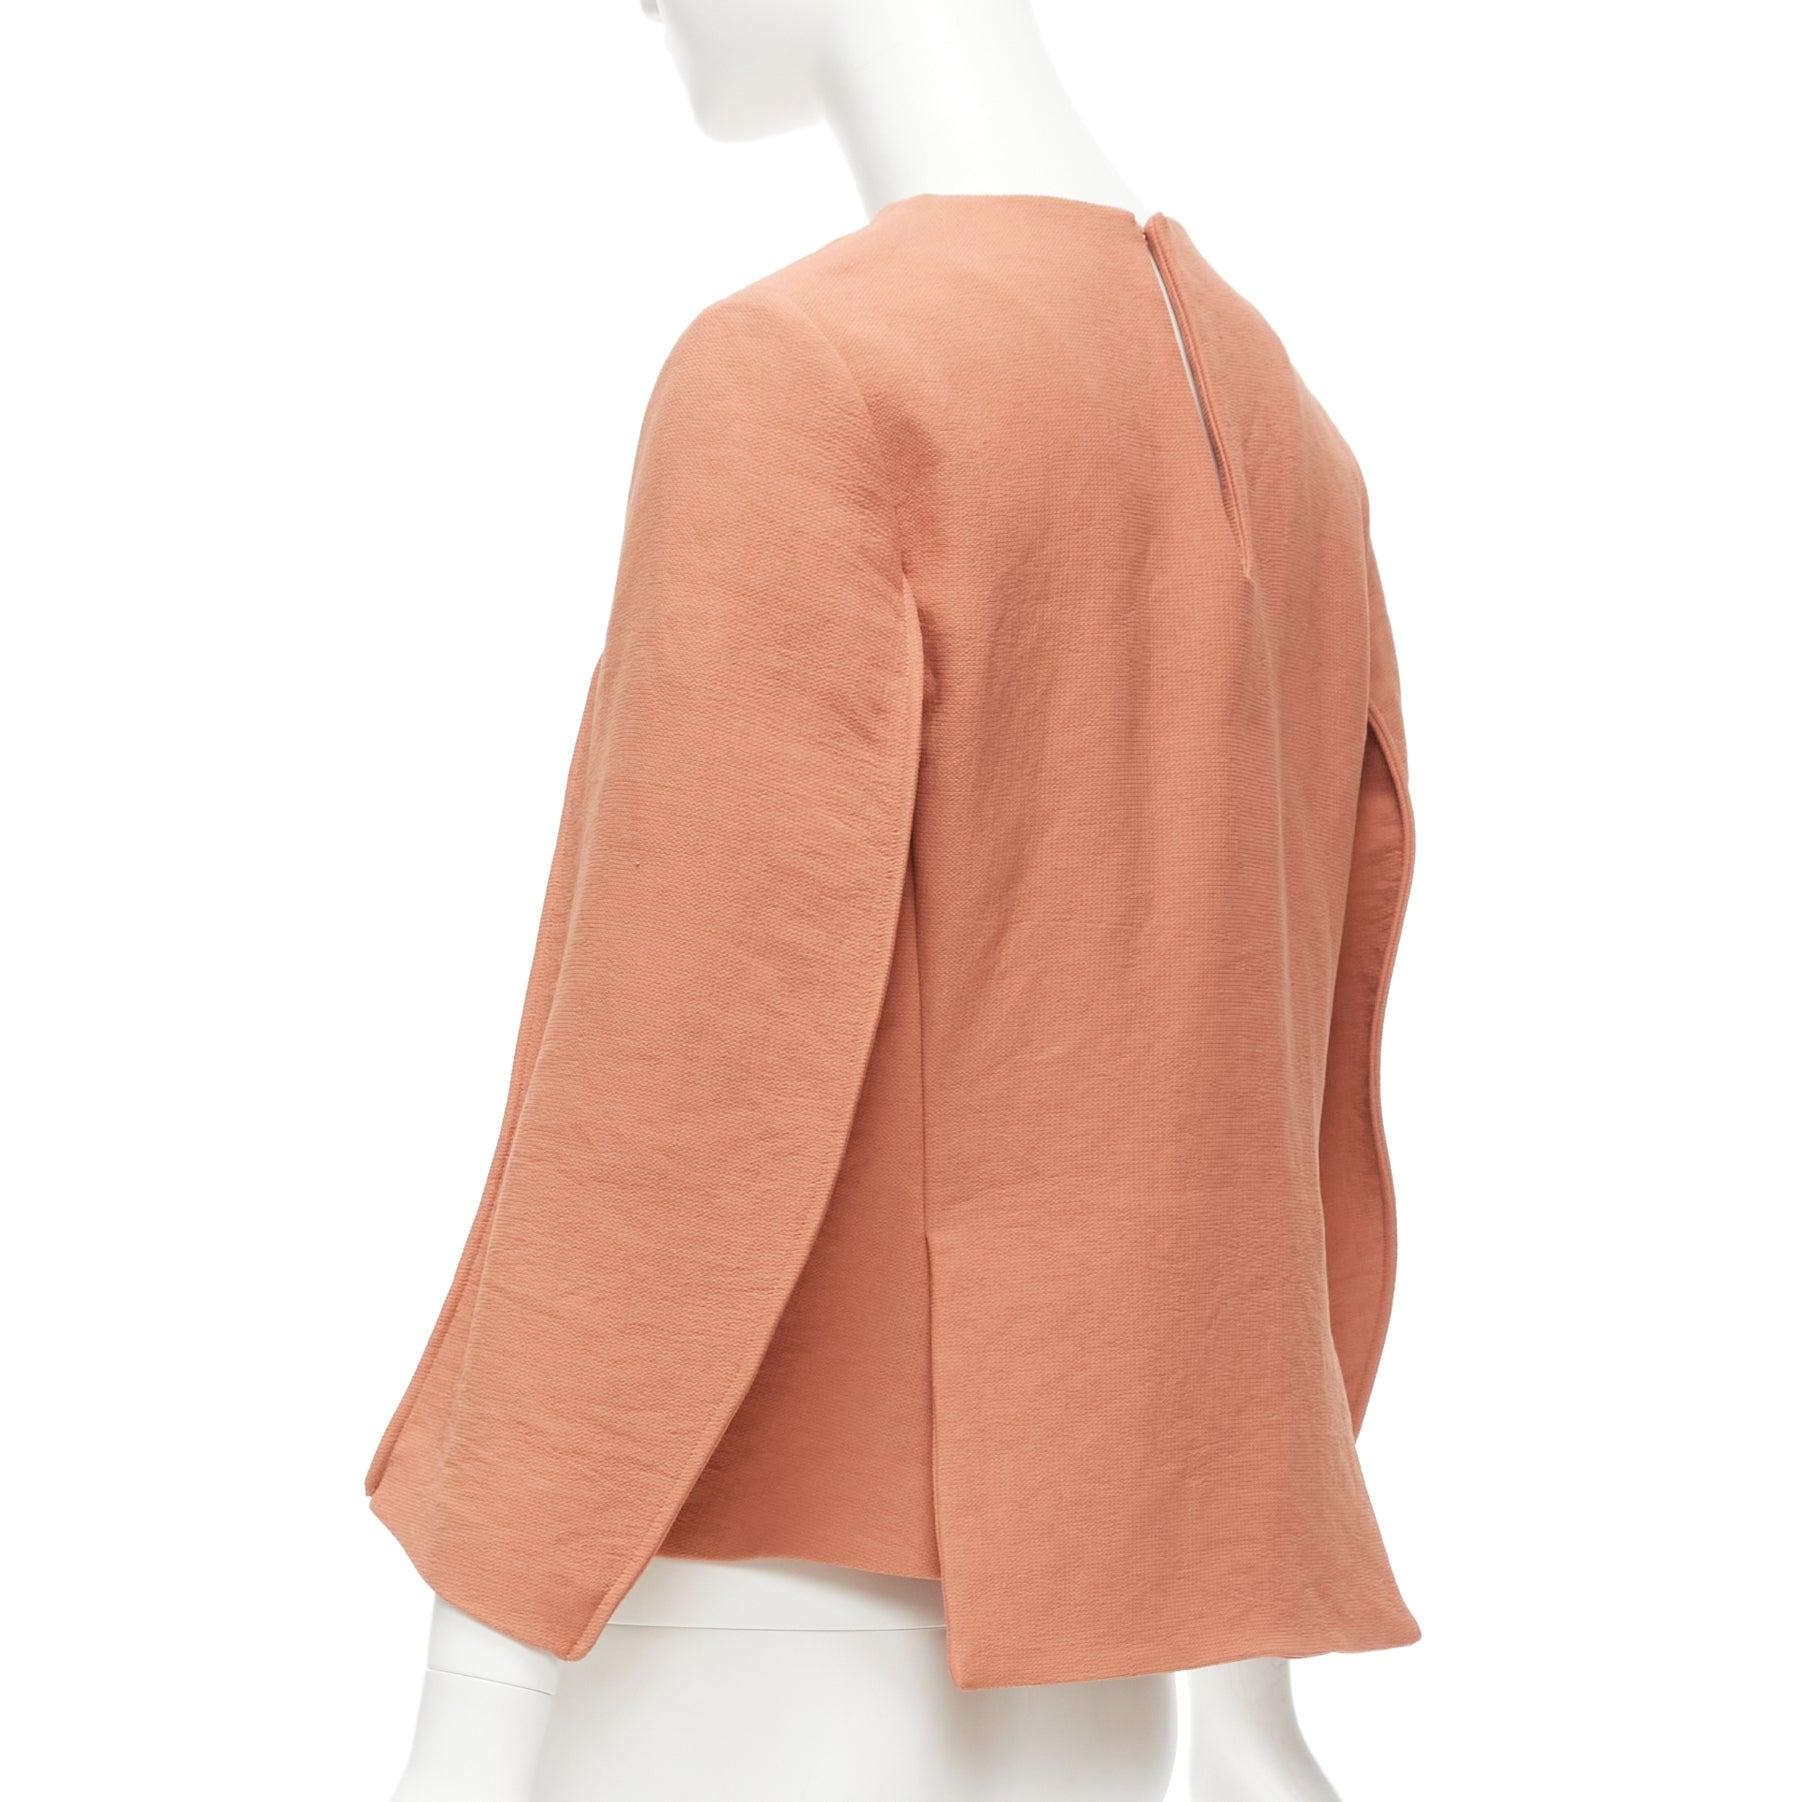 MARNI dusty pink reverse piped 3/4 sleeves crew neck top IT42 M
Reference: DYTG/A00045
Brand: Marni
Material: Polyester, Blend
Color: Pink
Pattern: Solid
Closure: Keyhole Button
Lining: Pink Fabric
Extra Details: Keyhole back. Curved sleeves